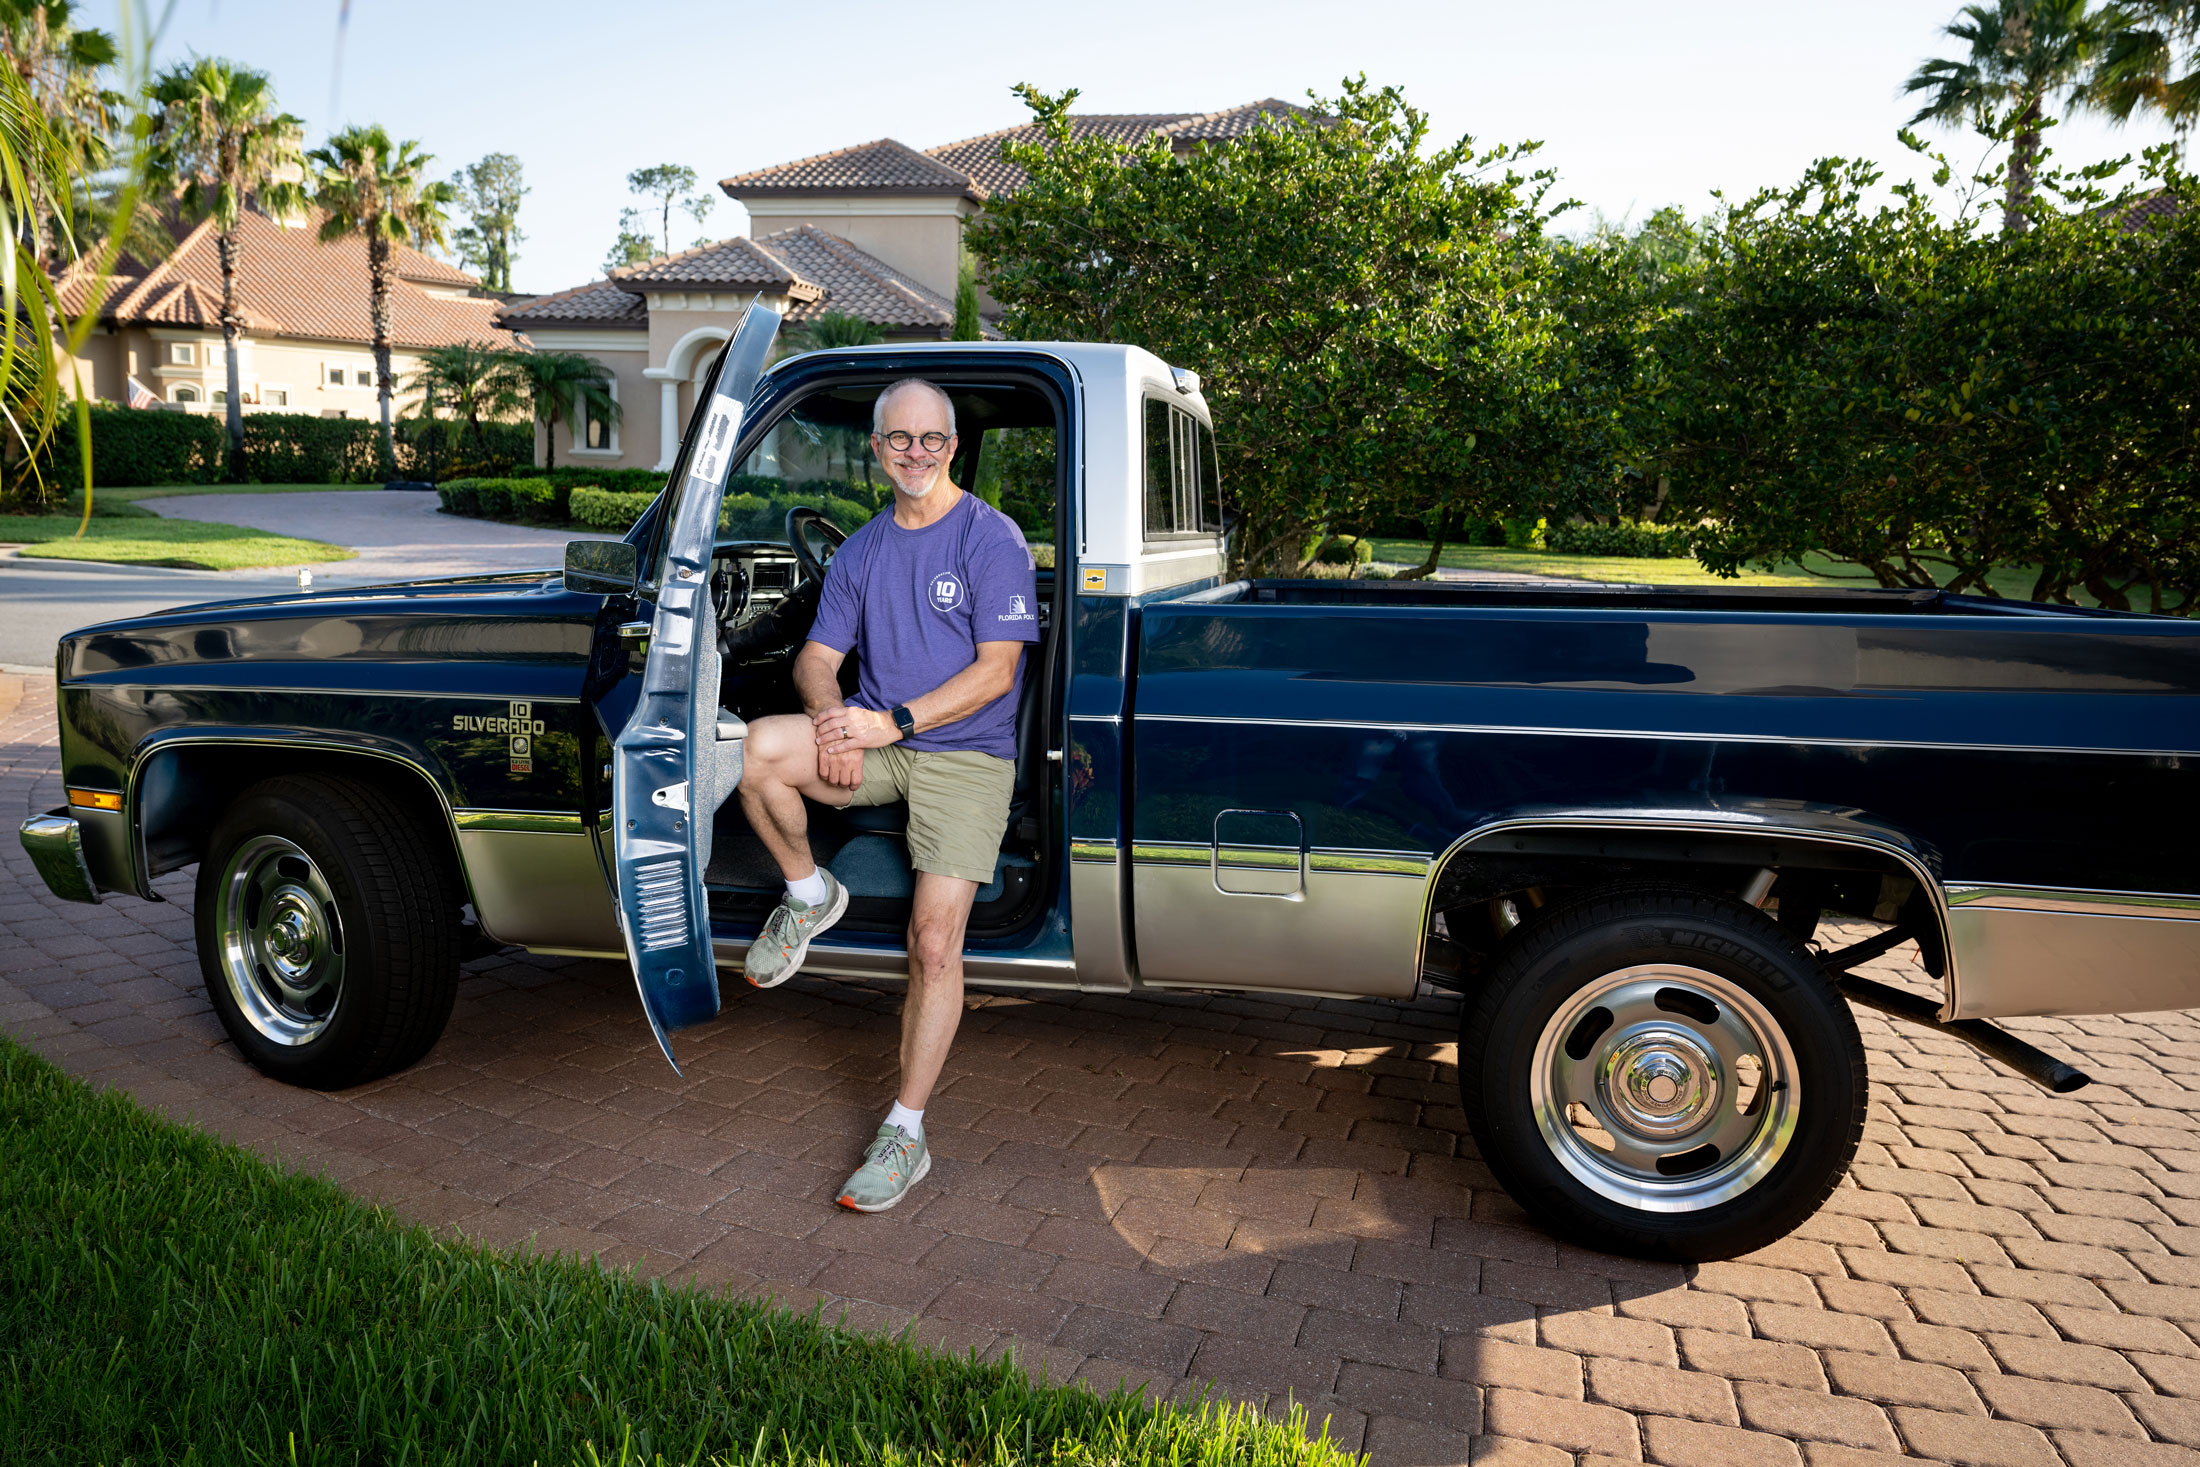 Dr. Randy Avent and his father's restored 1983 Chevrolet C10 pick-up truck